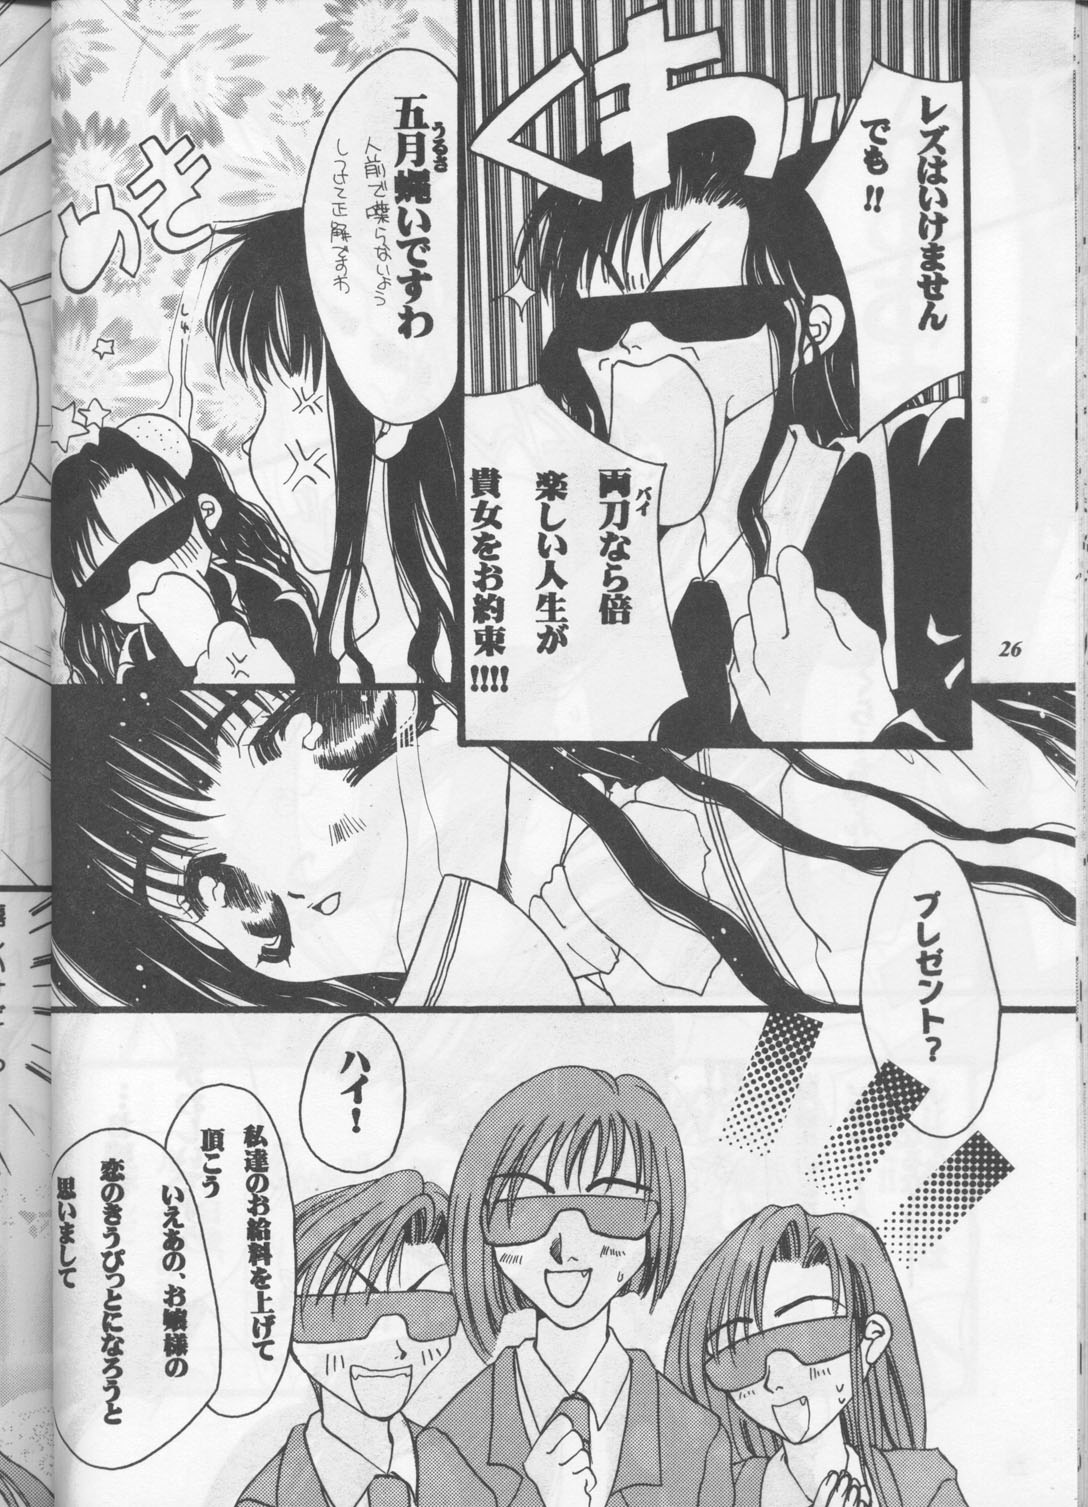 [Metal (Toumei Mieru)] PSYCHEDELIC PINK (Various) page 25 full